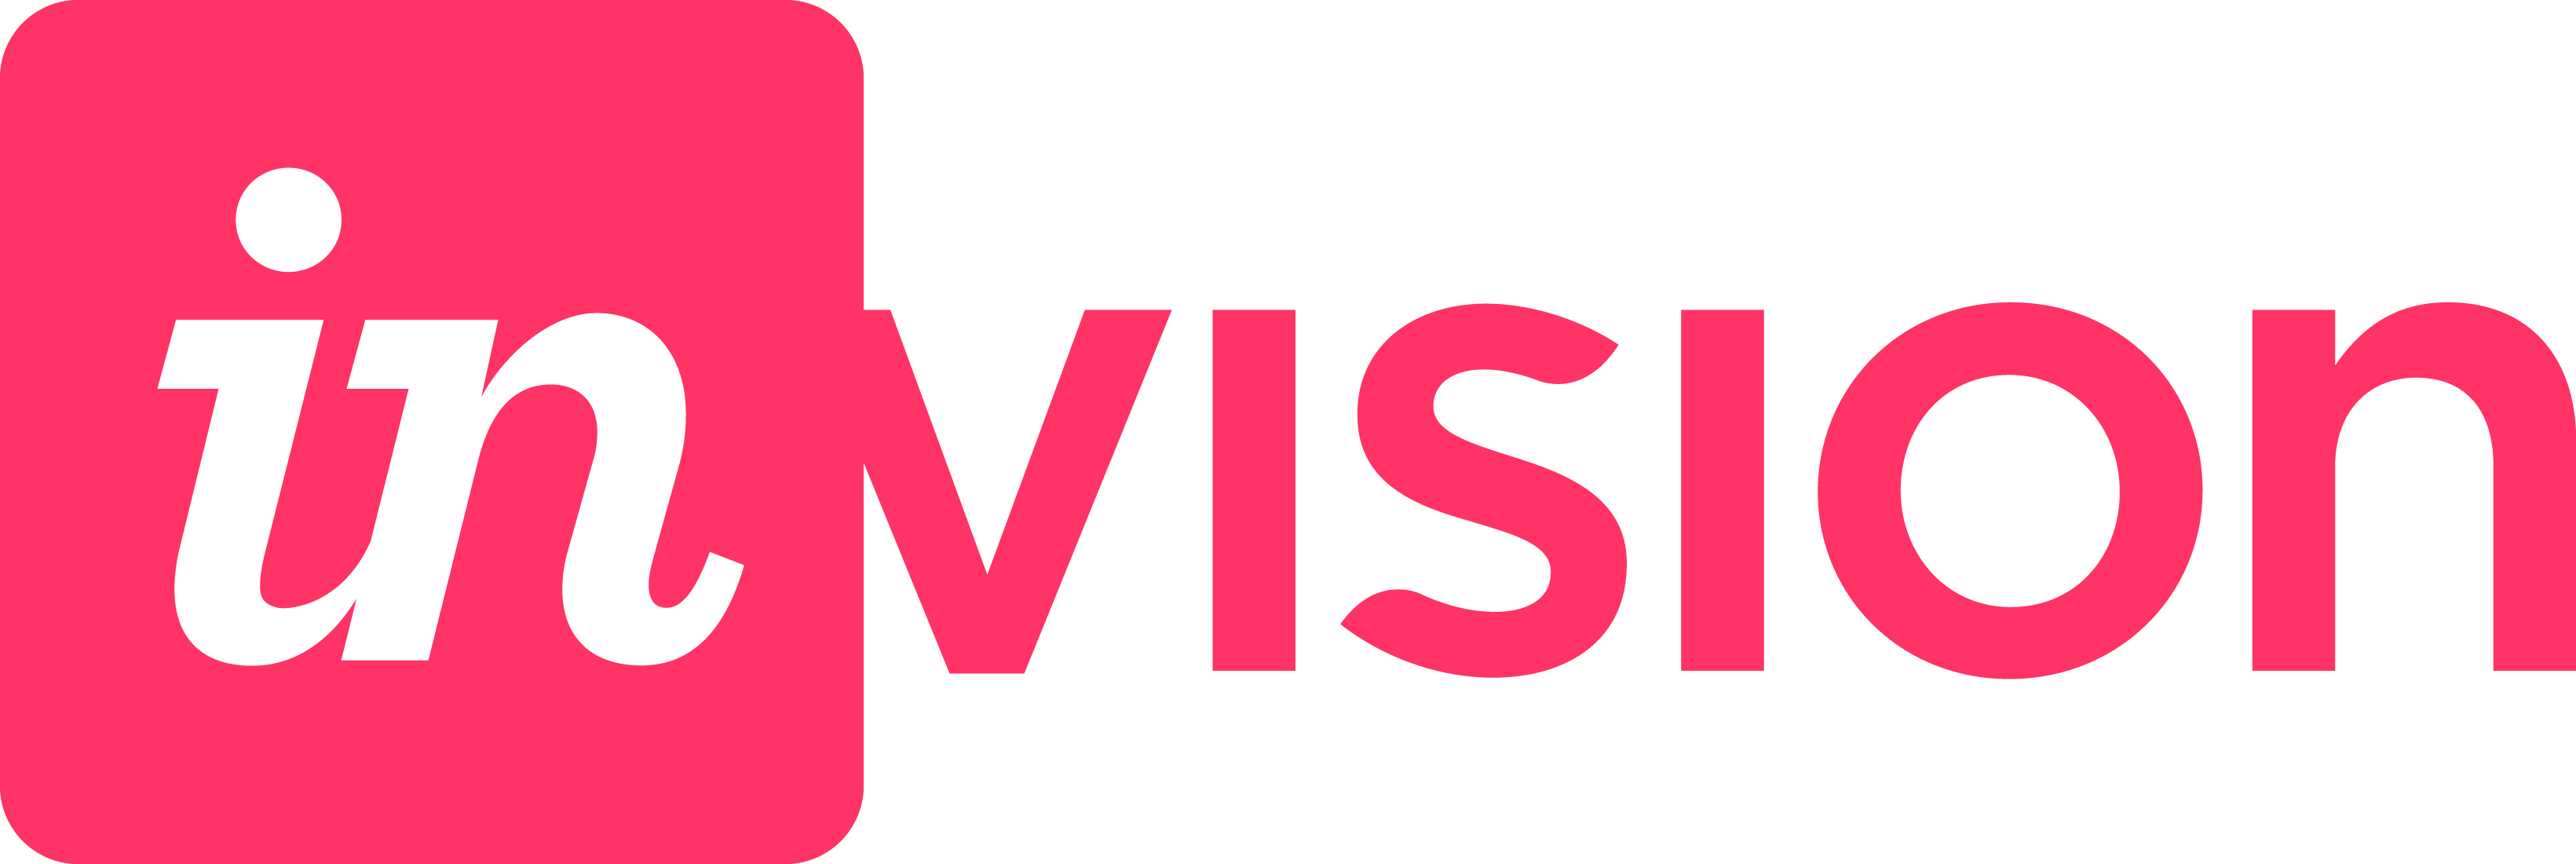 invision-logo-pink.png